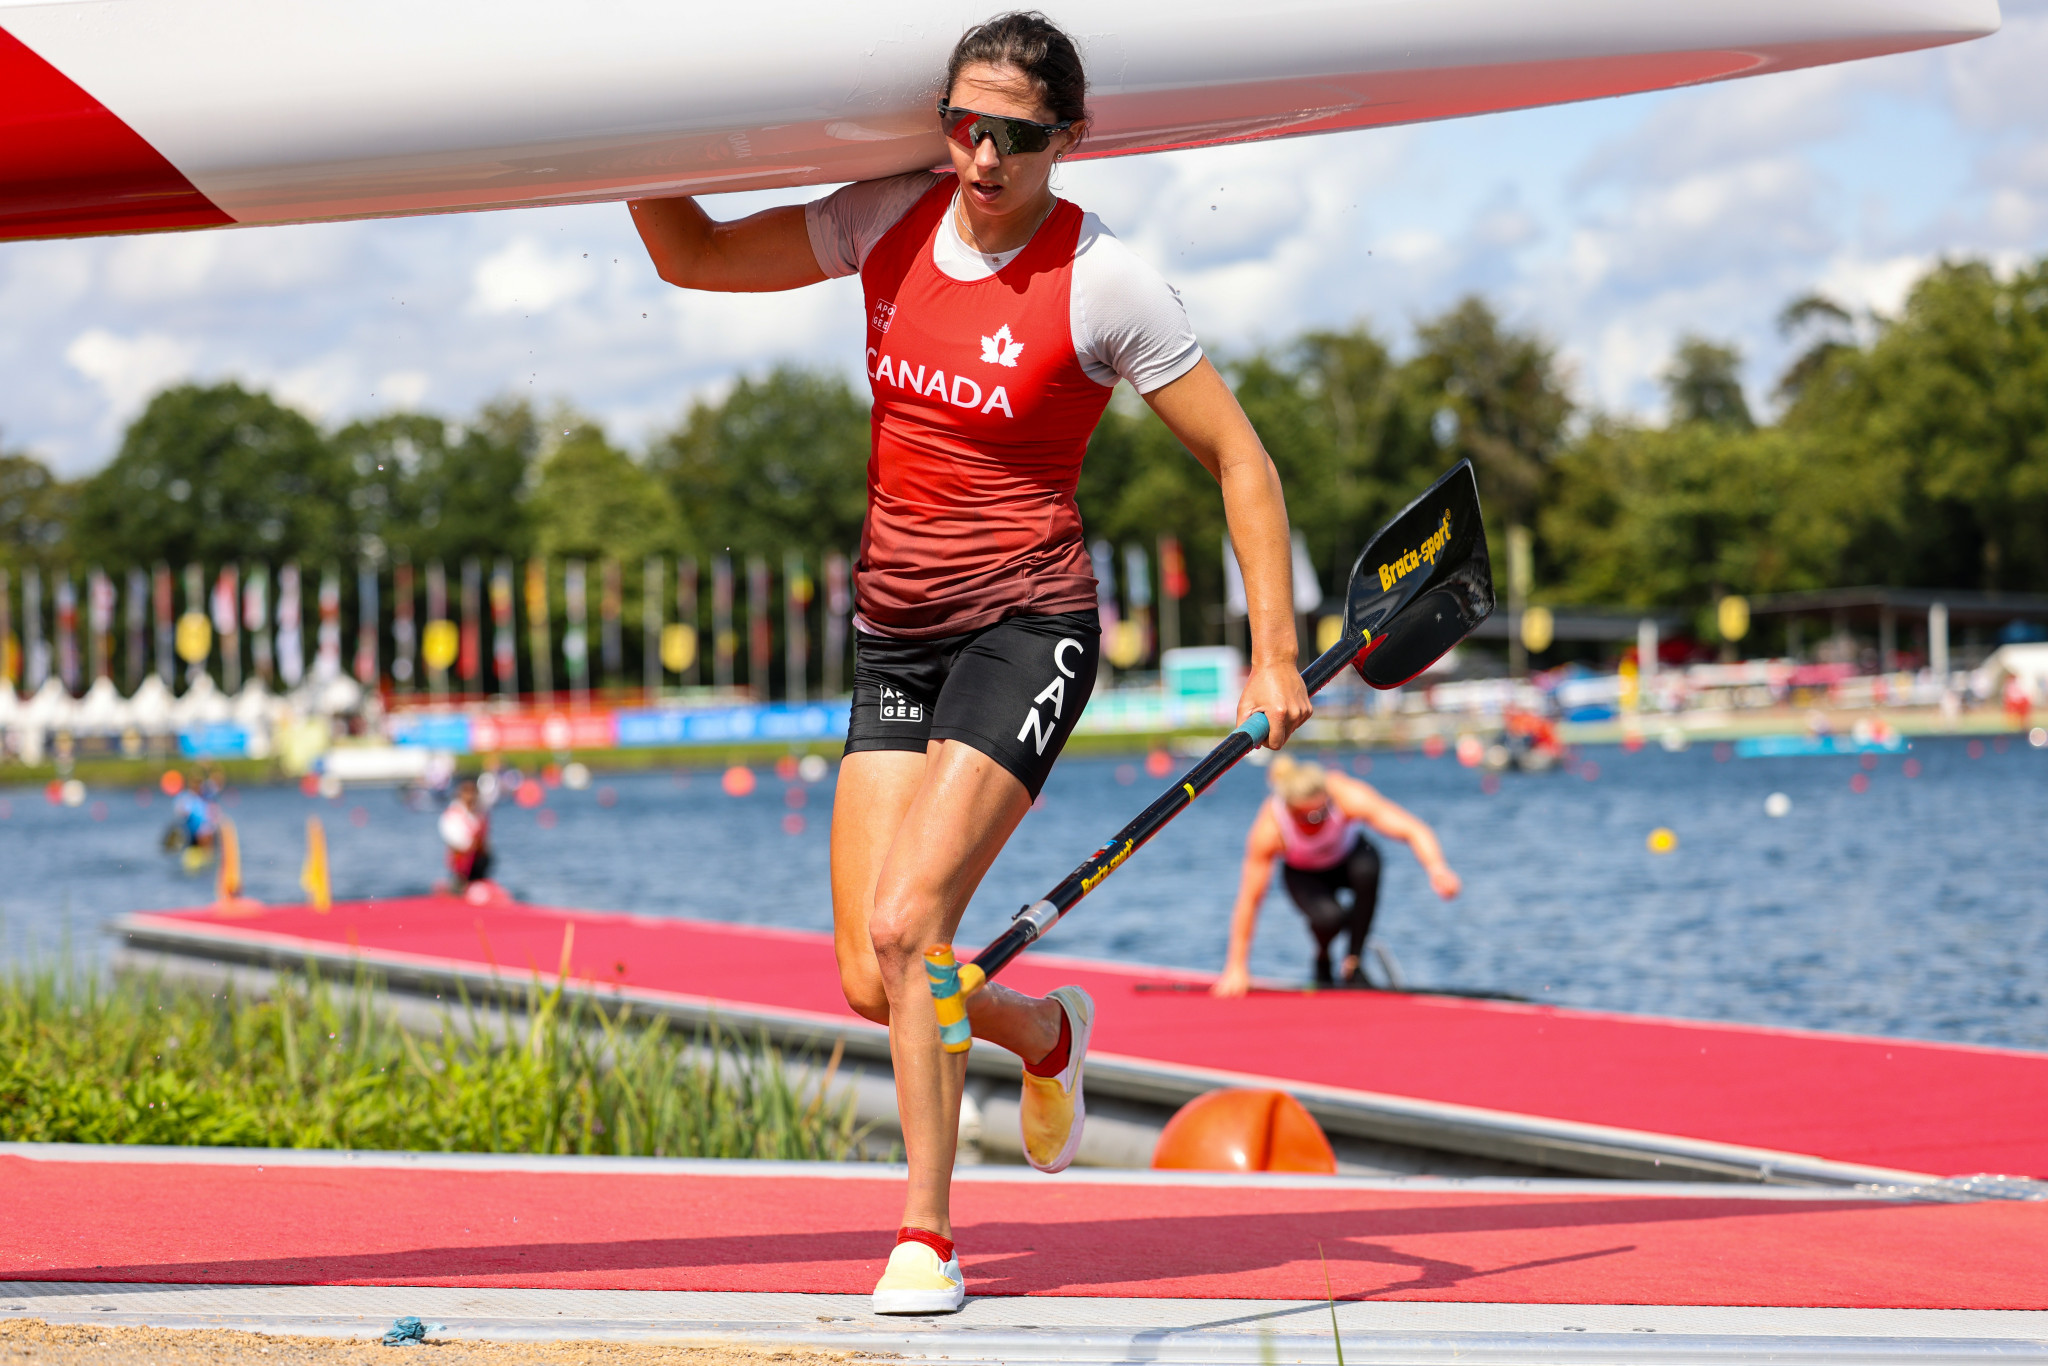 Athletes had to tackle the portage in every lap of the K1 5,000m races at the recent Canoe Sprint World Championships in Duisburg ©ICF